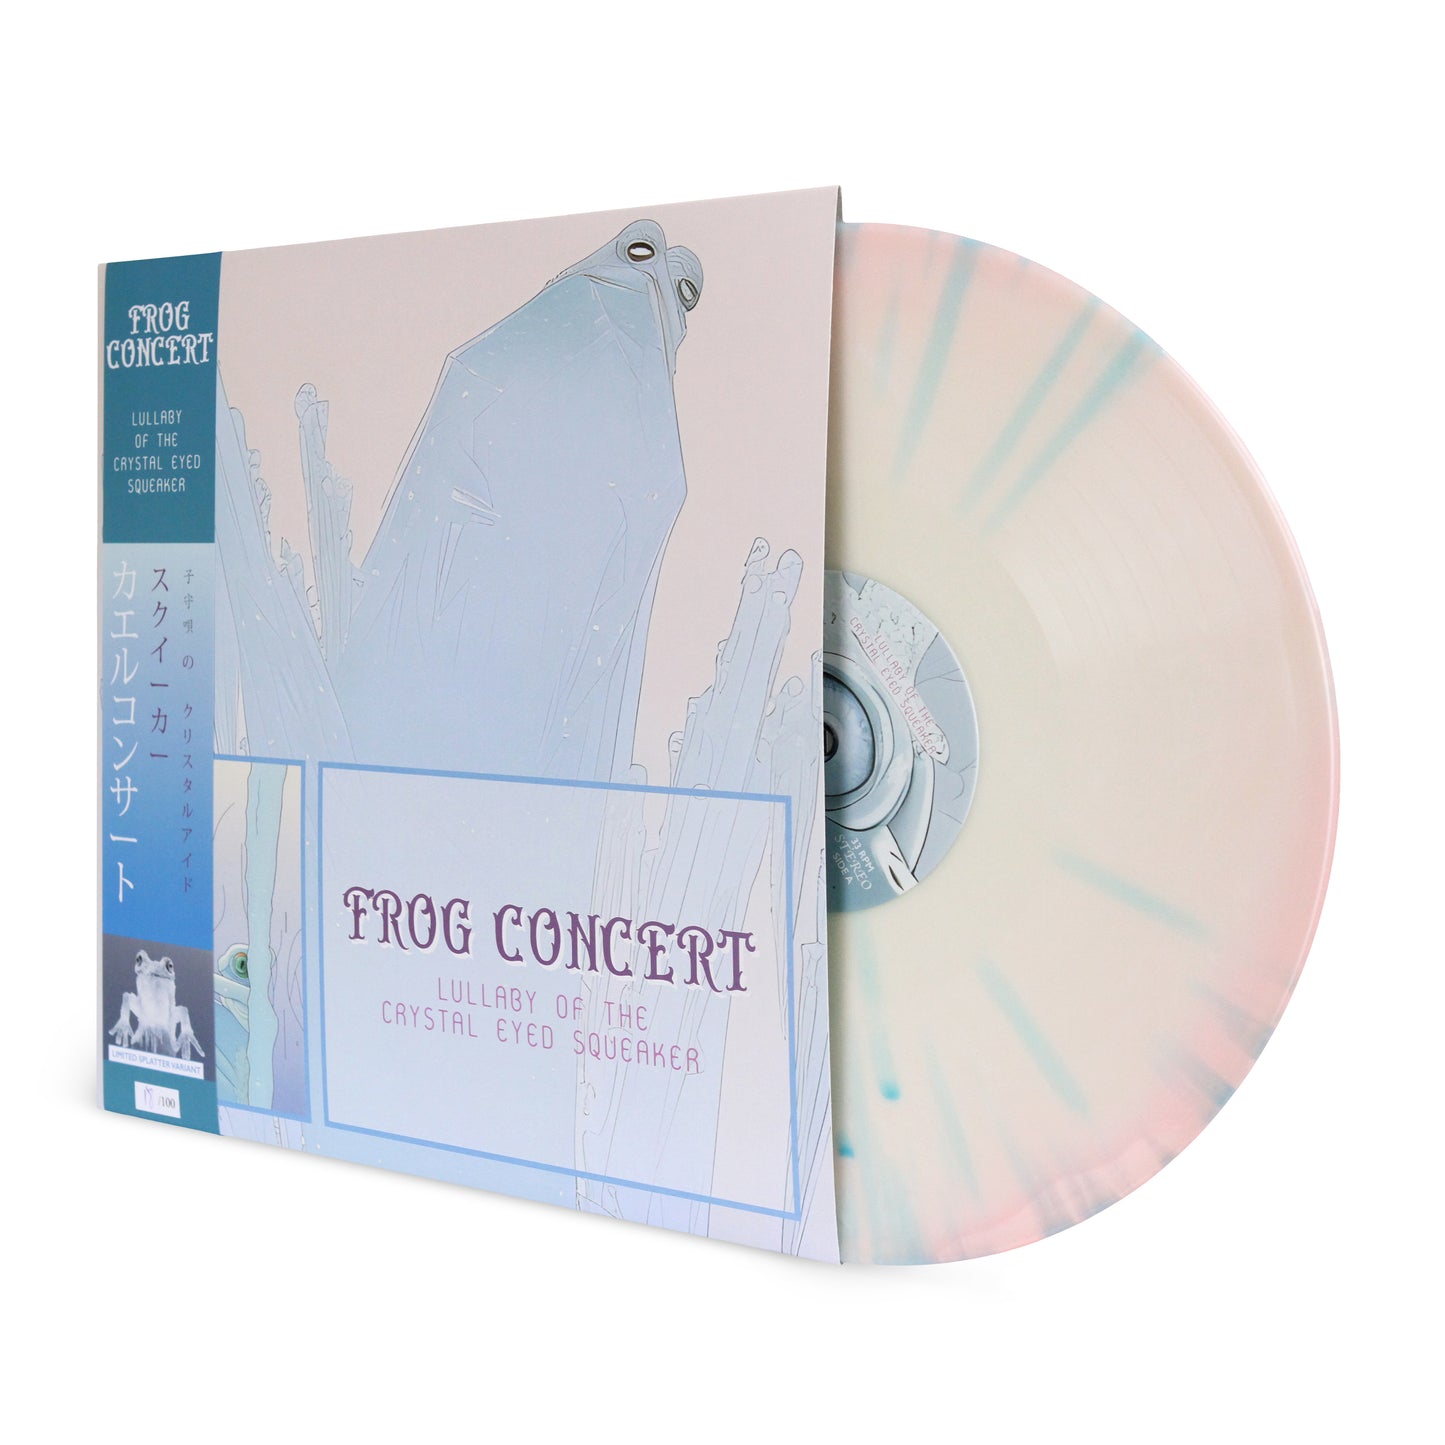 FROG CONCERT - Lullaby of the Crystal Eyed Squeaker LP